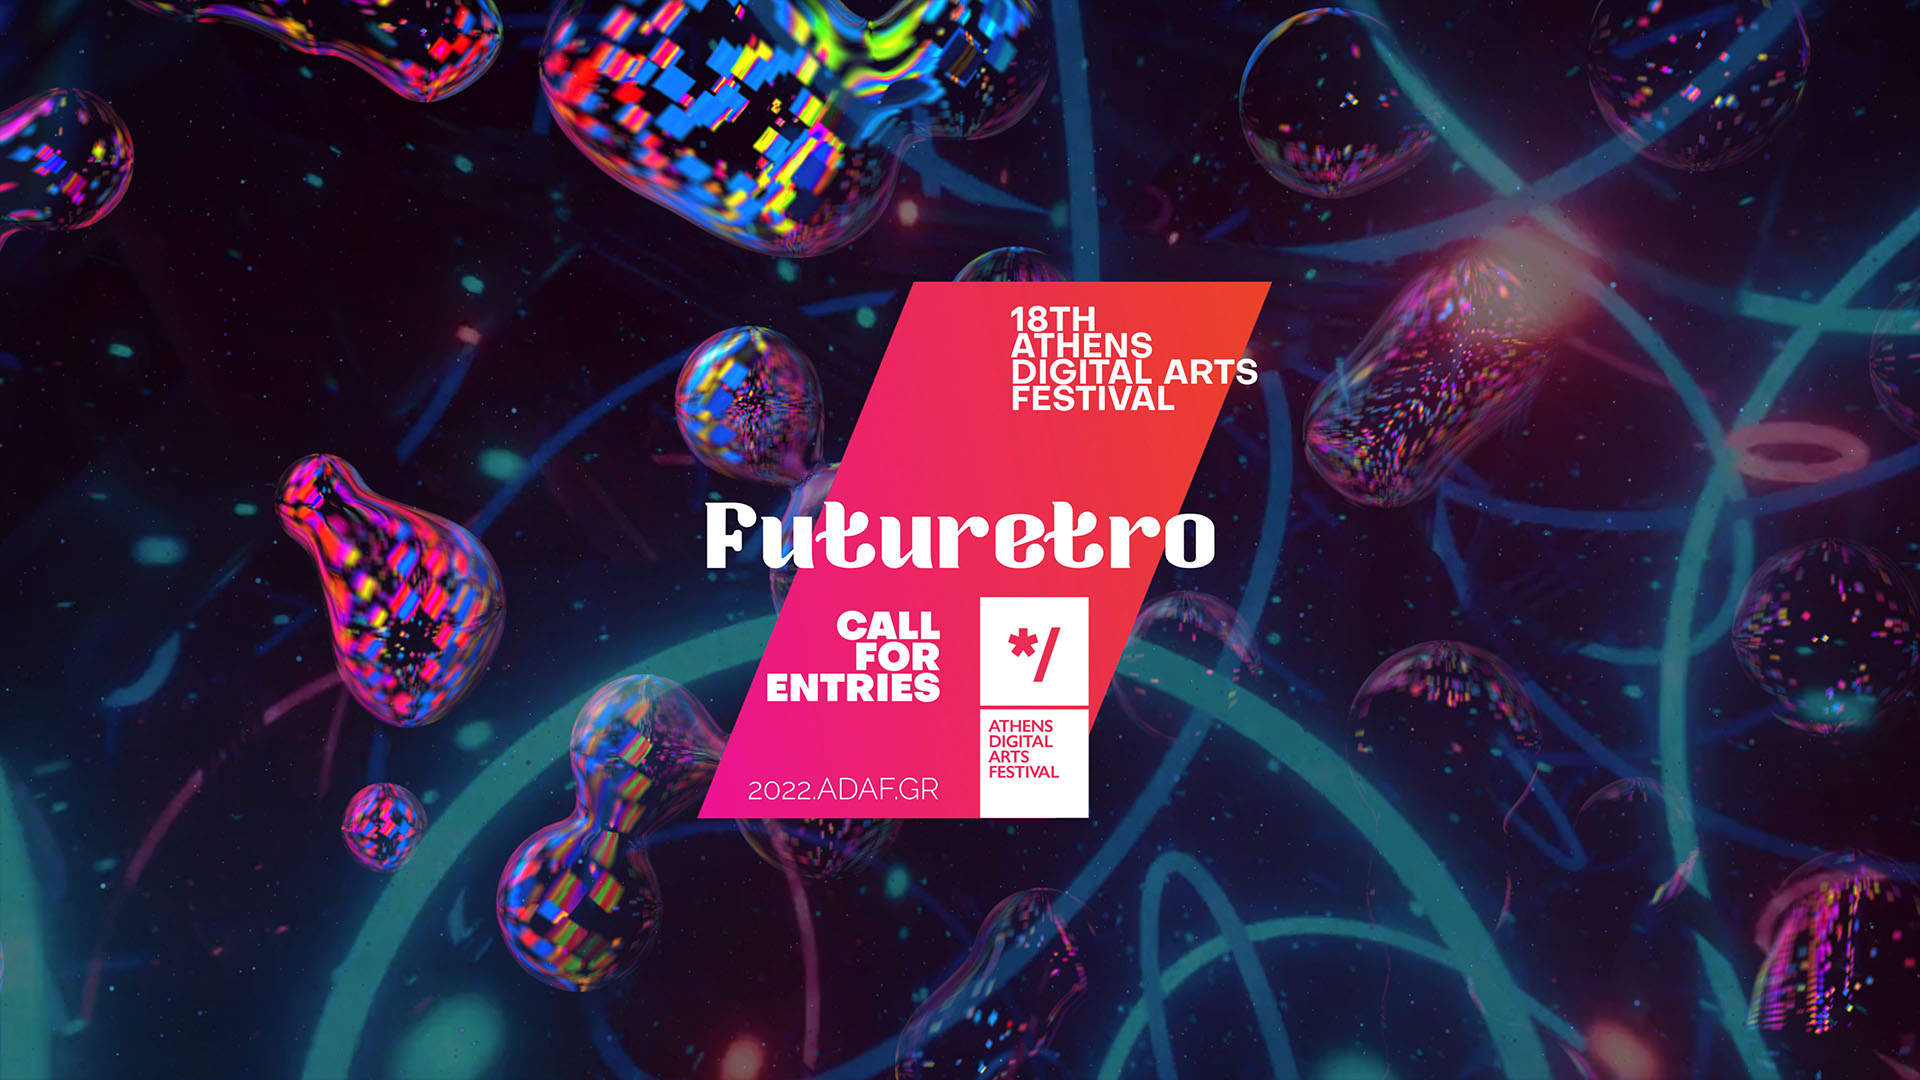 The 18th ADAF is here and it is FutuRetro!